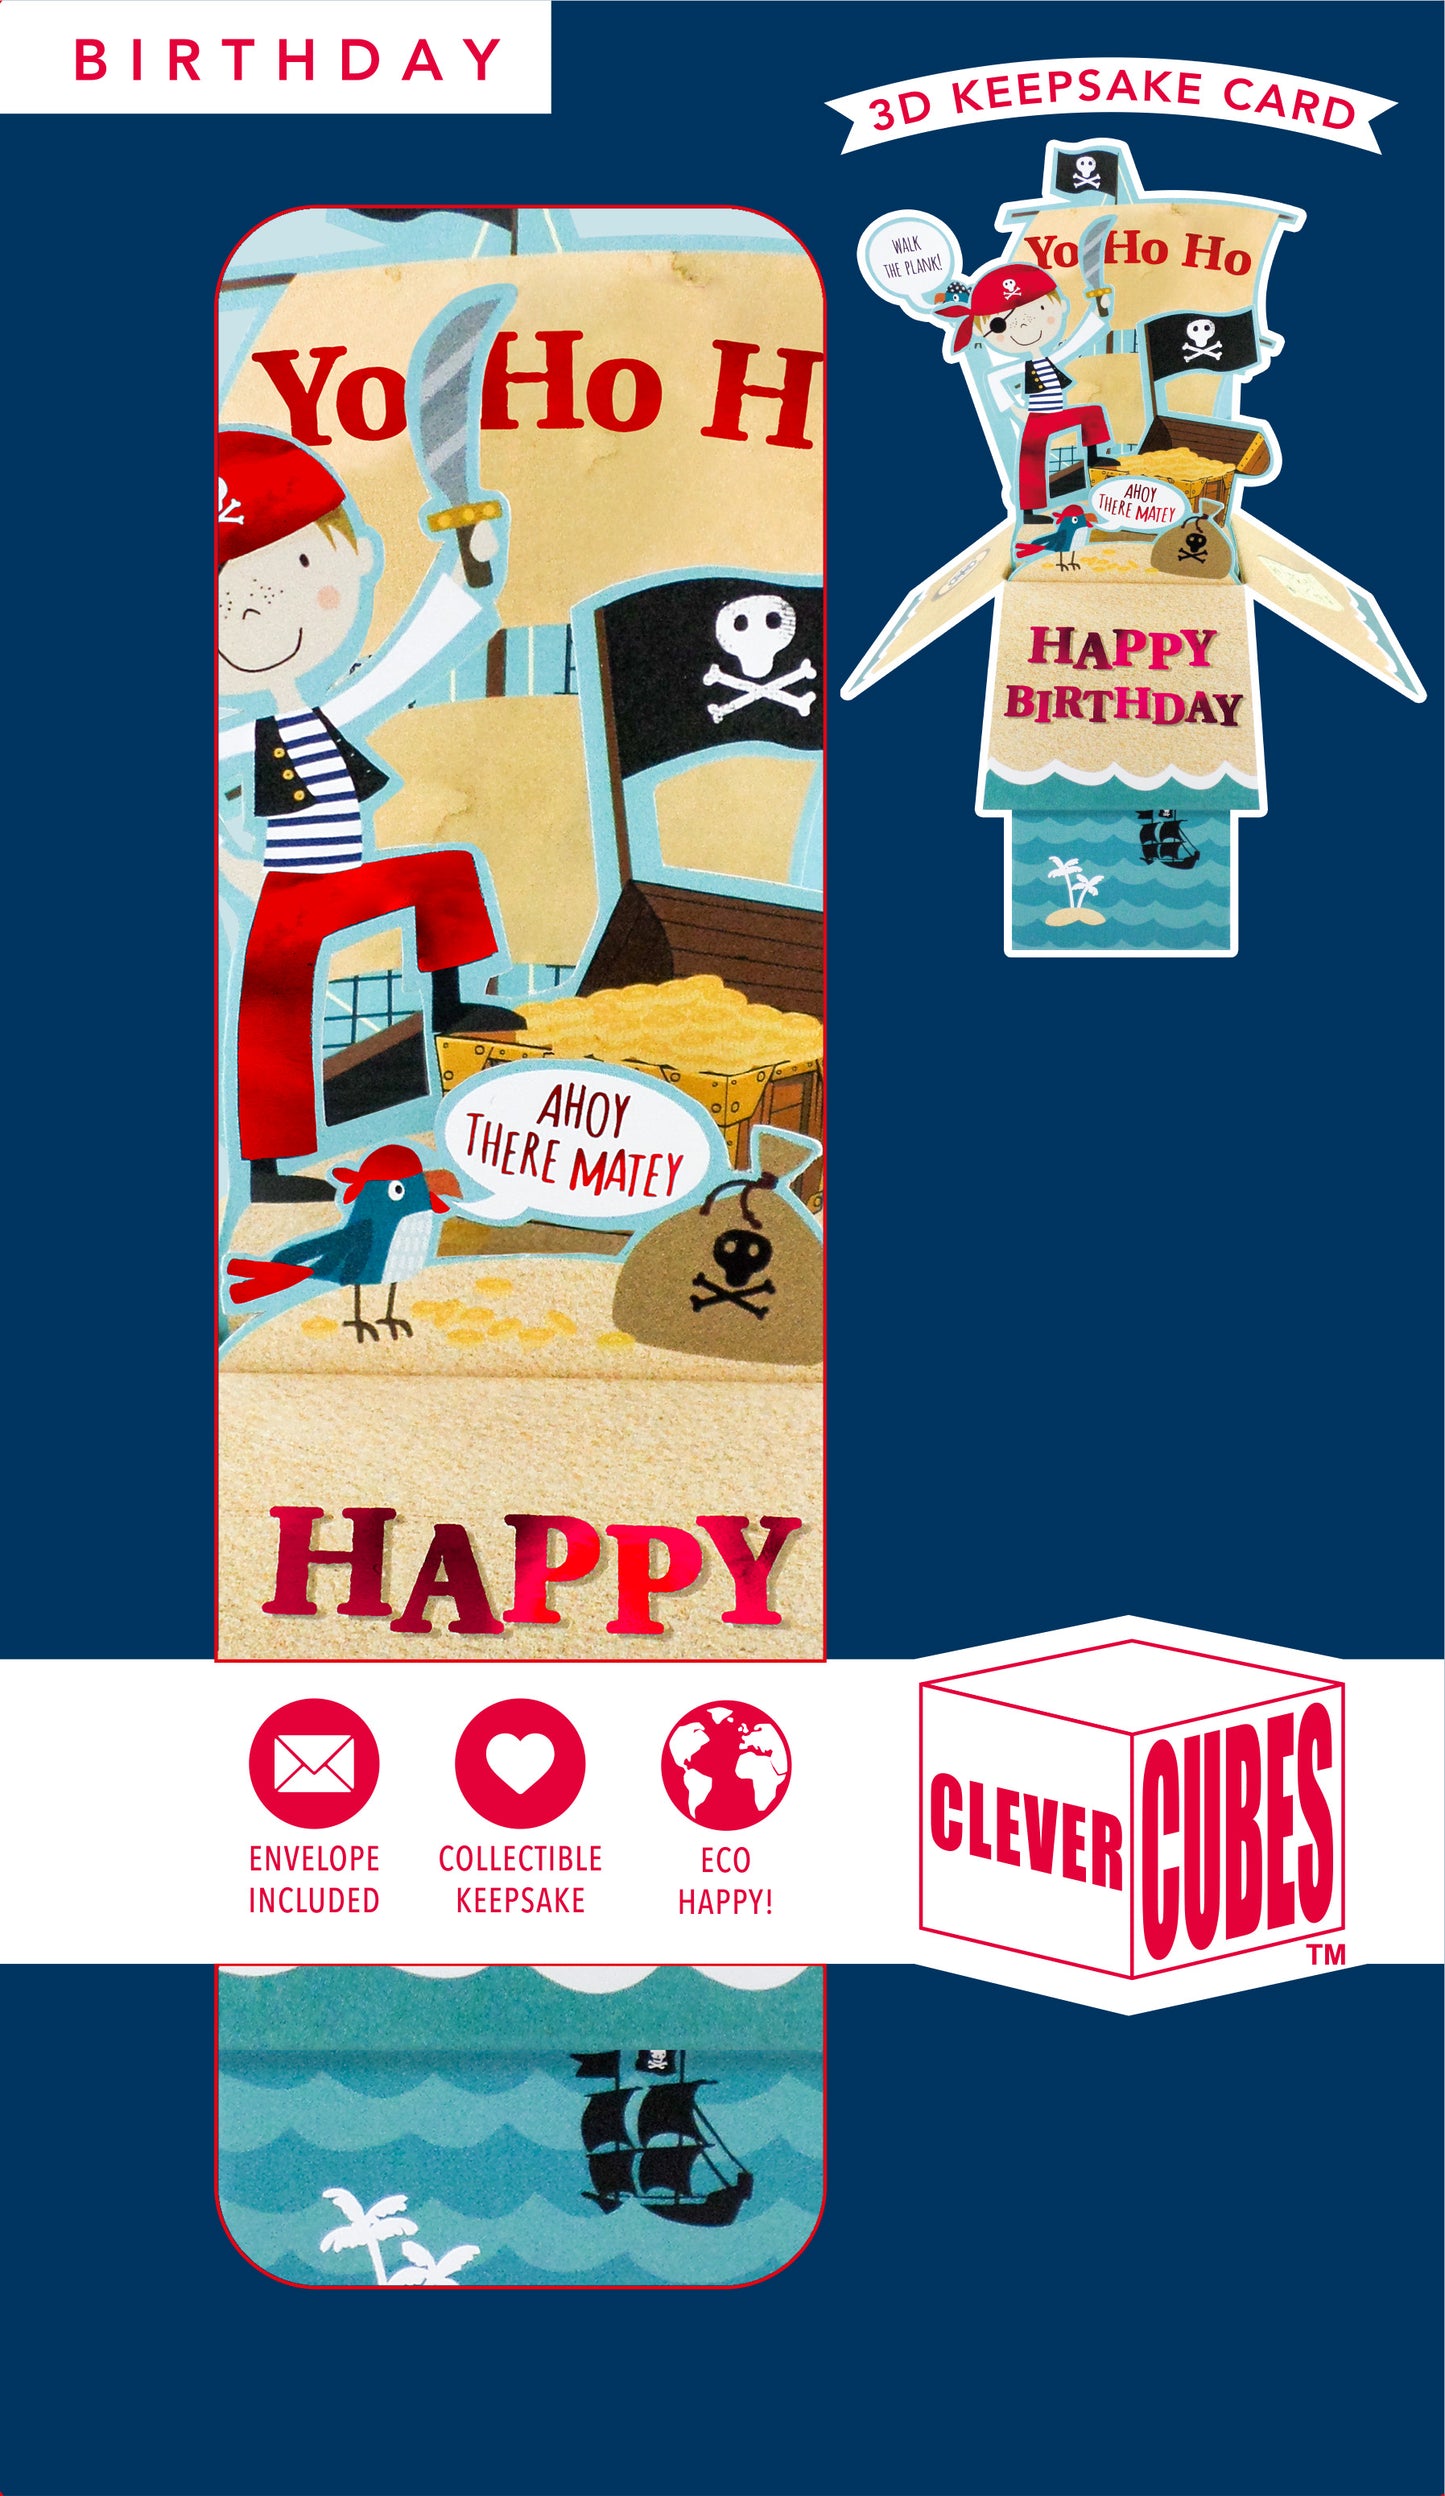 Clever Cube Ahoy there Matey Pirate Pals Ahoy! Birthday Pop Up Greeting Card